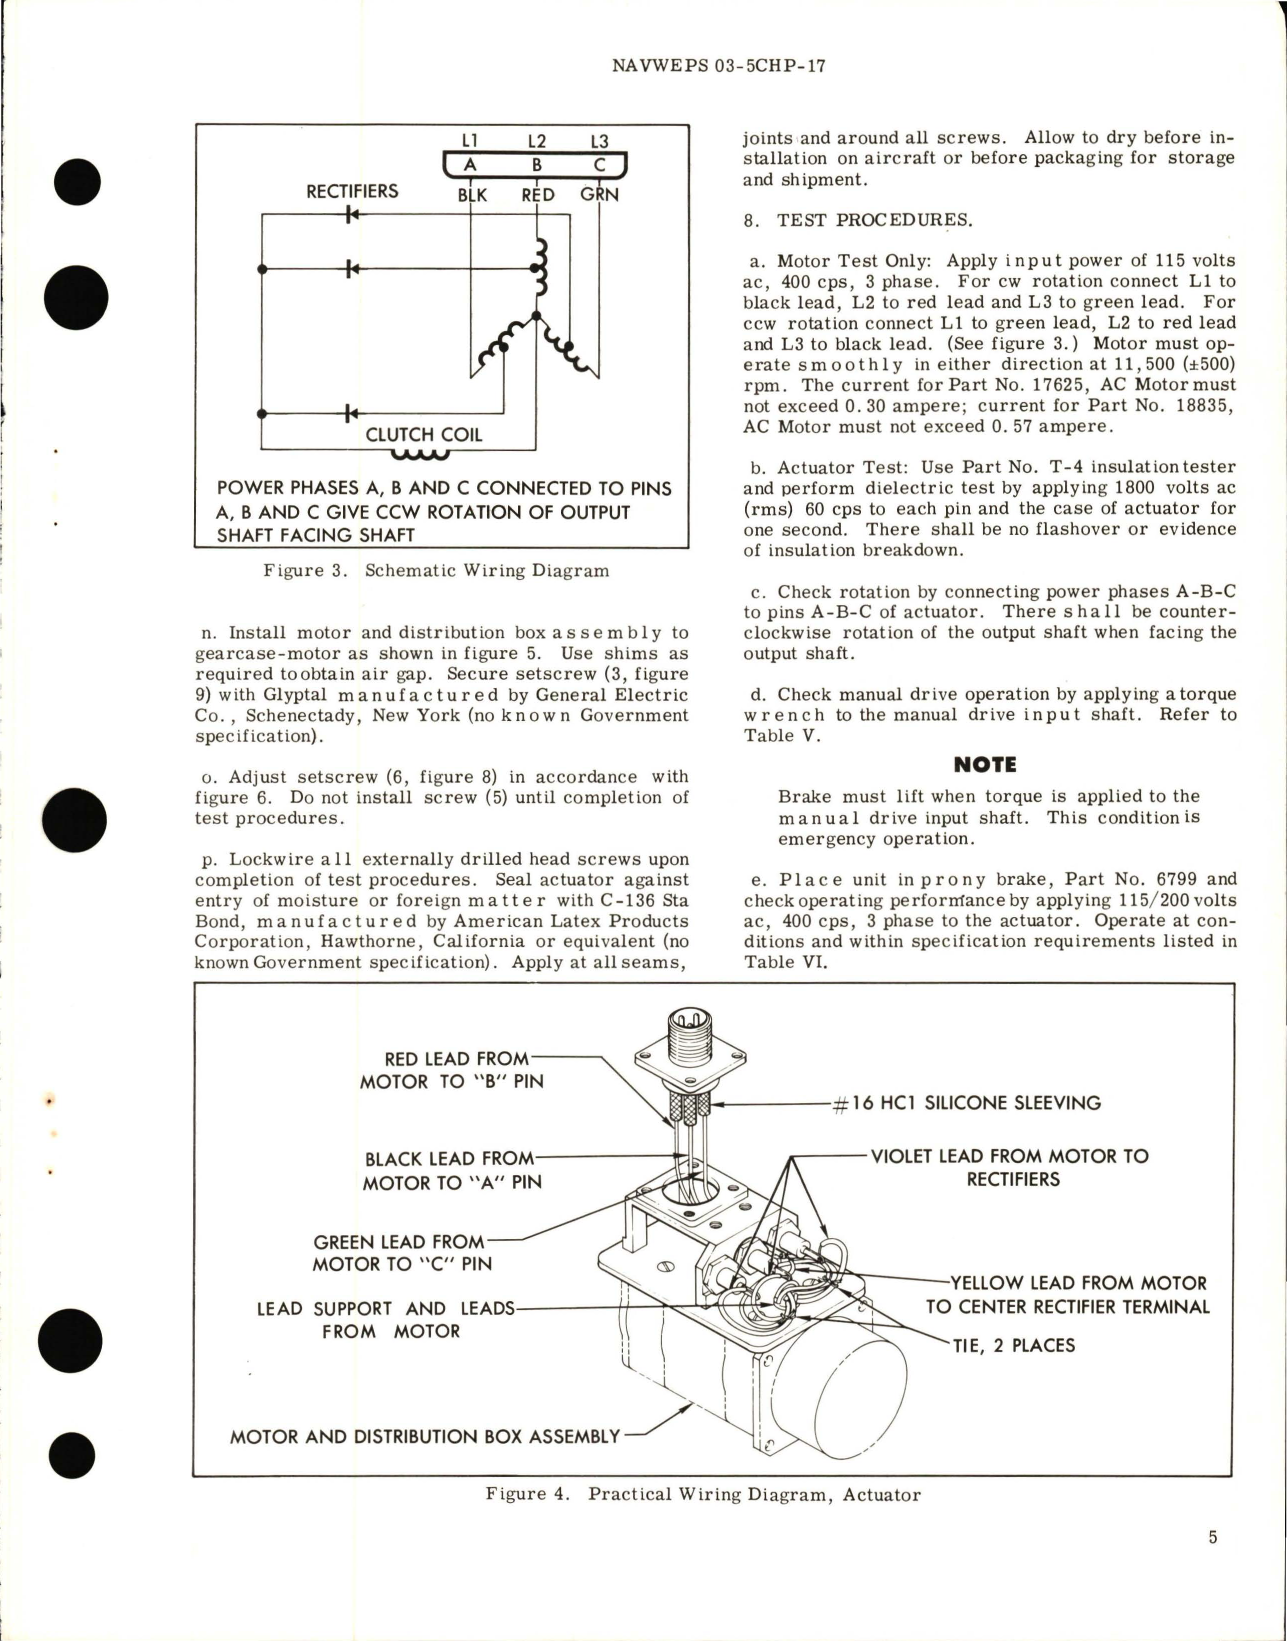 Sample page 7 from AirCorps Library document: Overhaul Instructions with Parts Breakdown for Electro-Mechanical Rotary Actuator